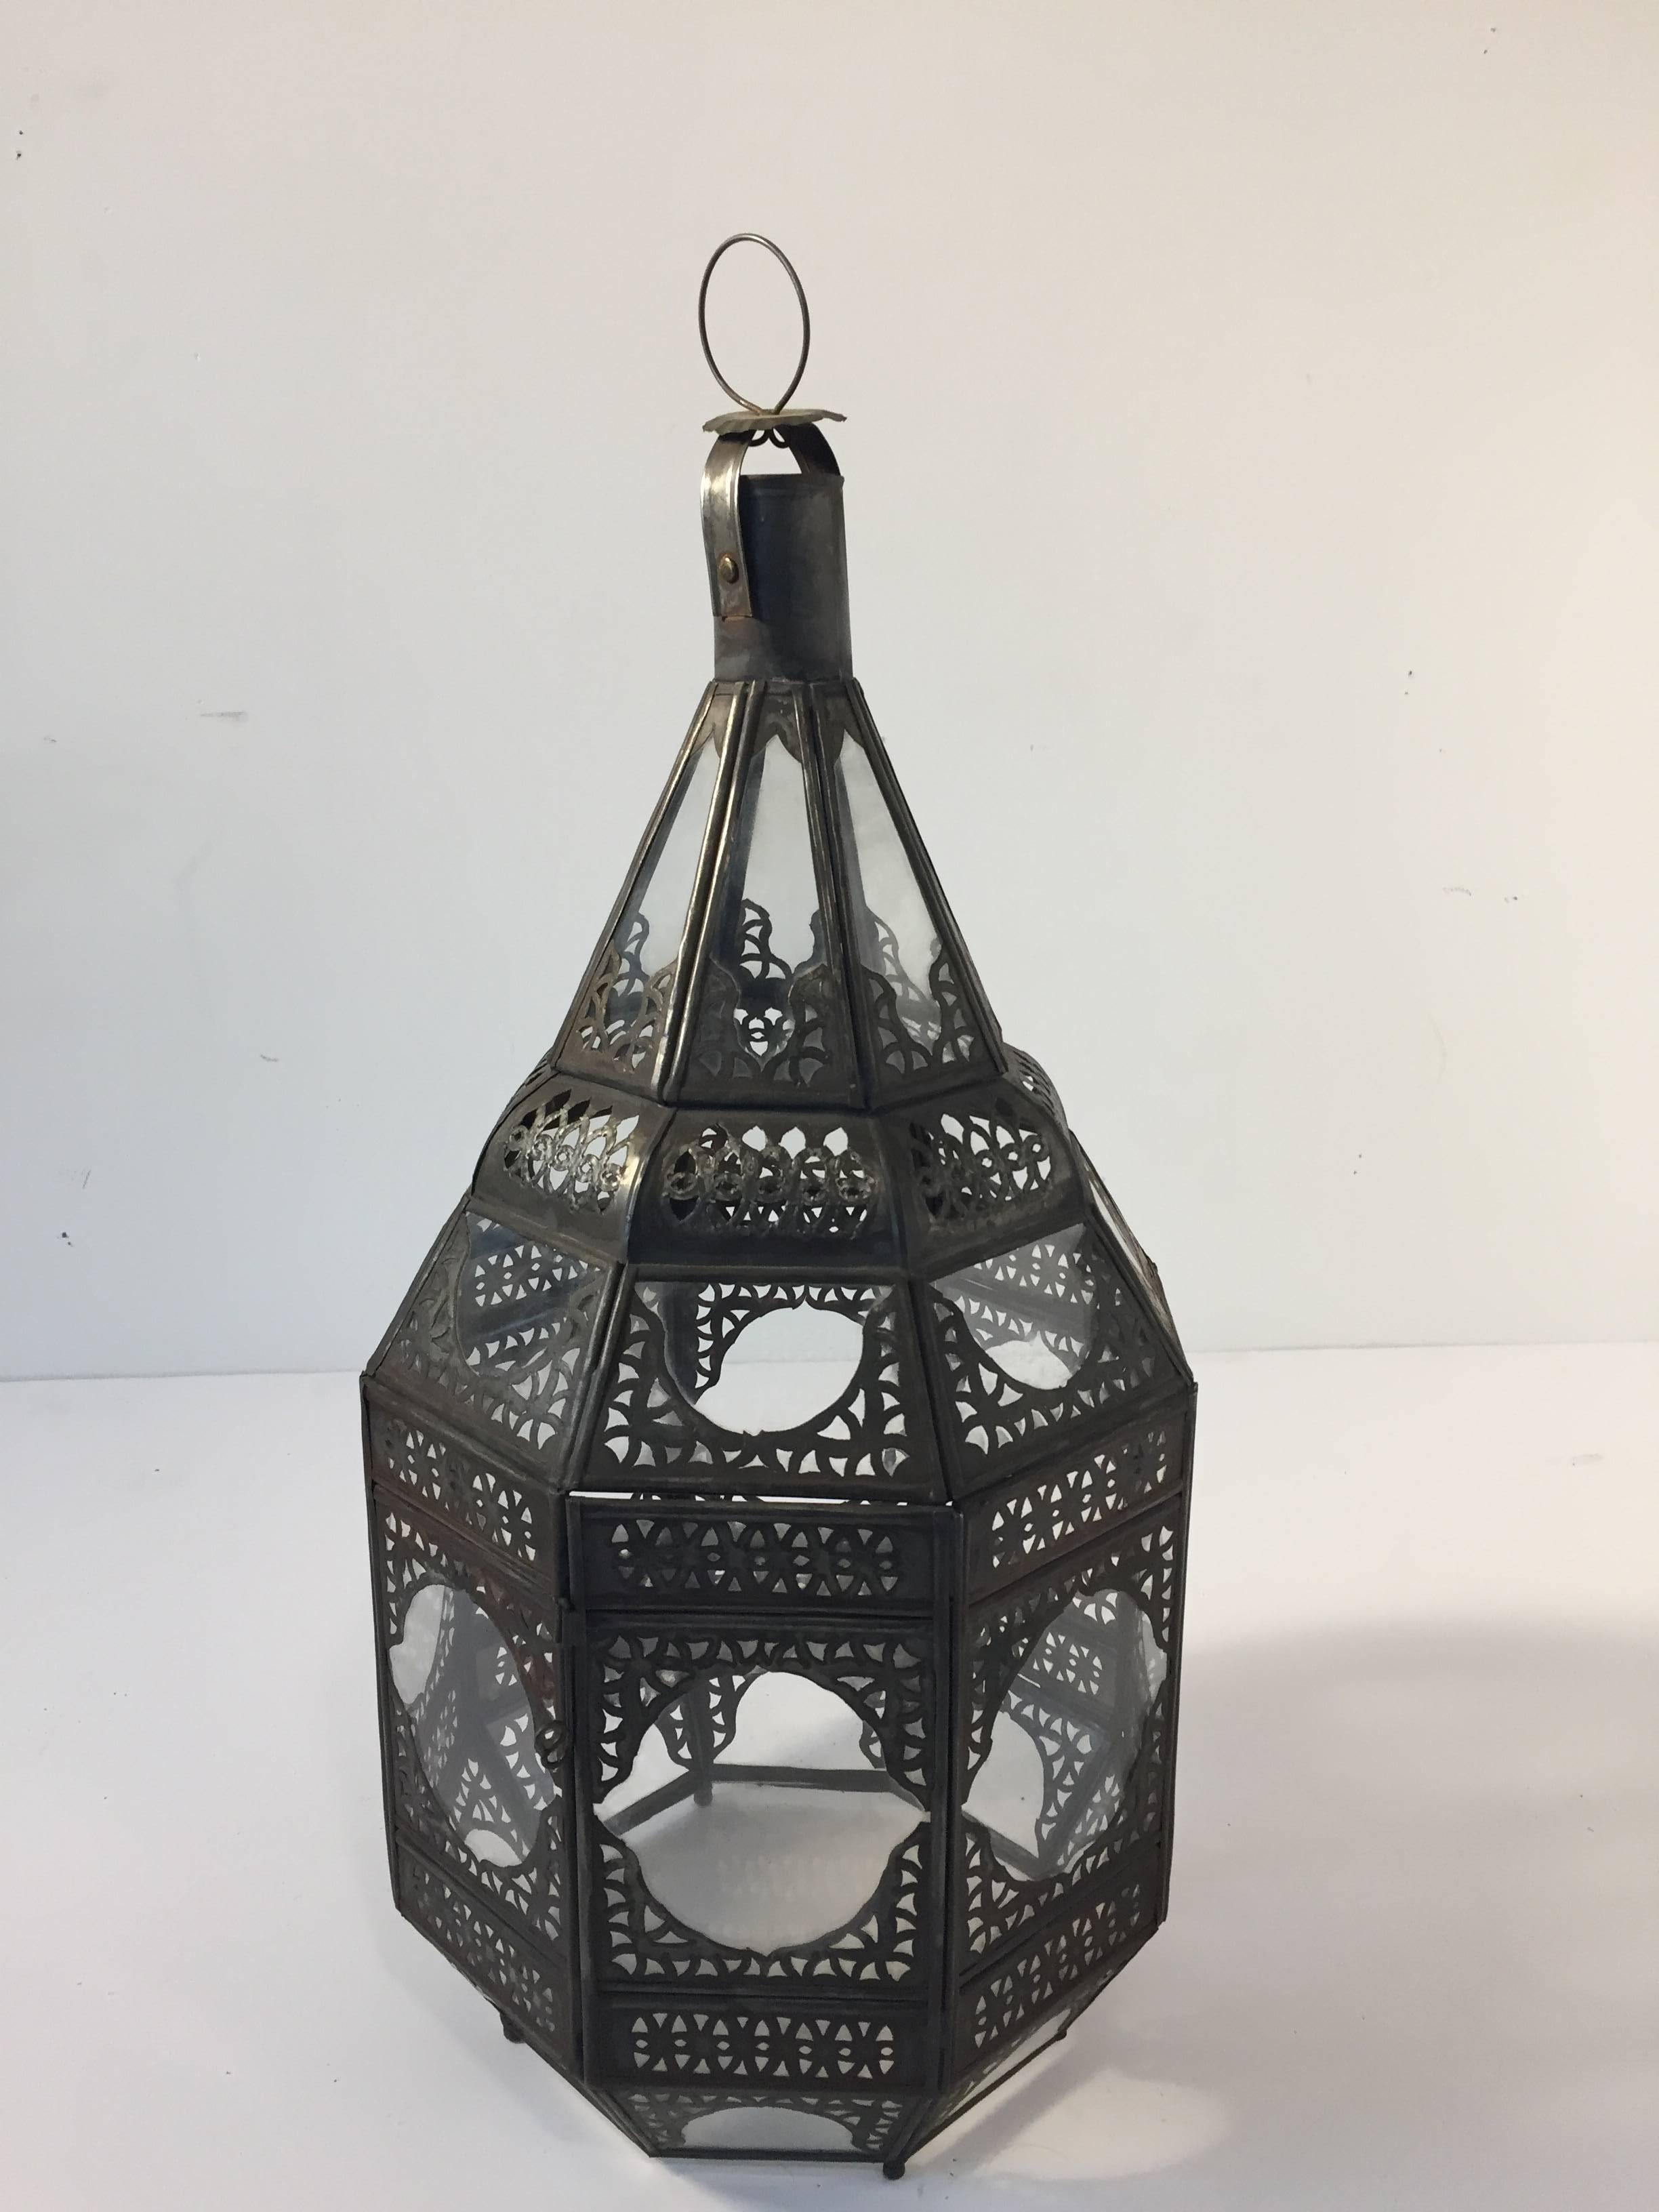 Moroccan Moorish clear glass lantern with intricate metal filigree.
Octagonal shape, delicately handcrafted by artisans in Morocco.
Bronze metal color finish.
Could be used with candle or rewired for electricity.
Multiple available contact